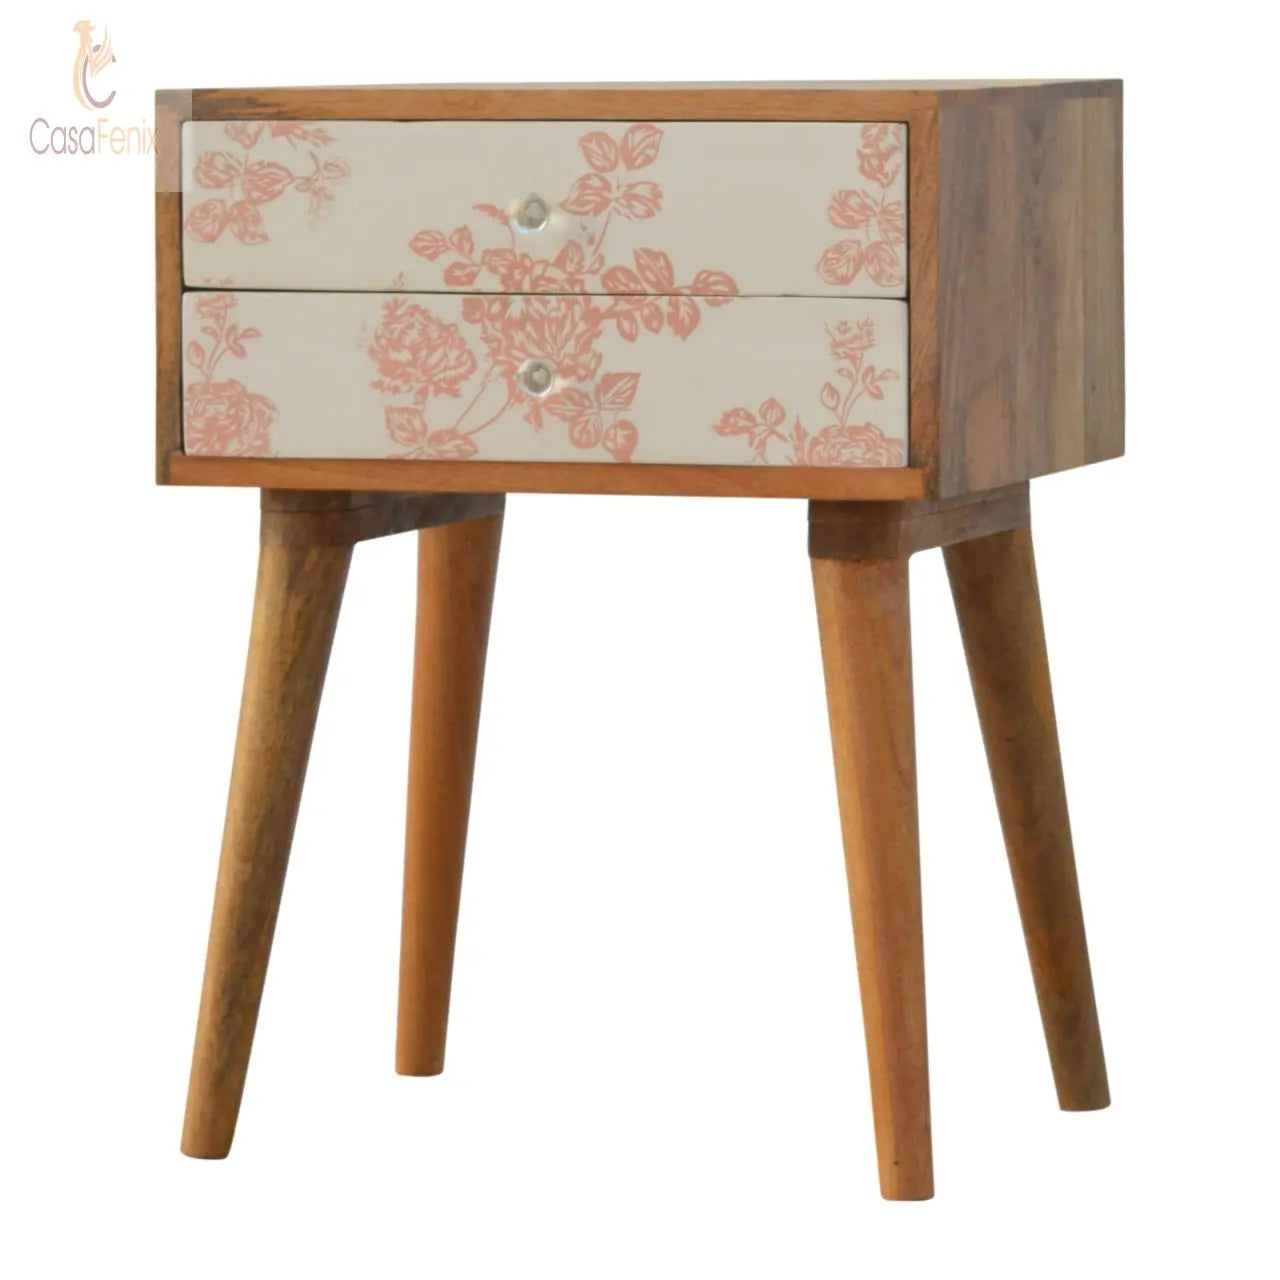 Pink Floral Screen Printed Bedside Table 2 Door Chest - CasaFenix